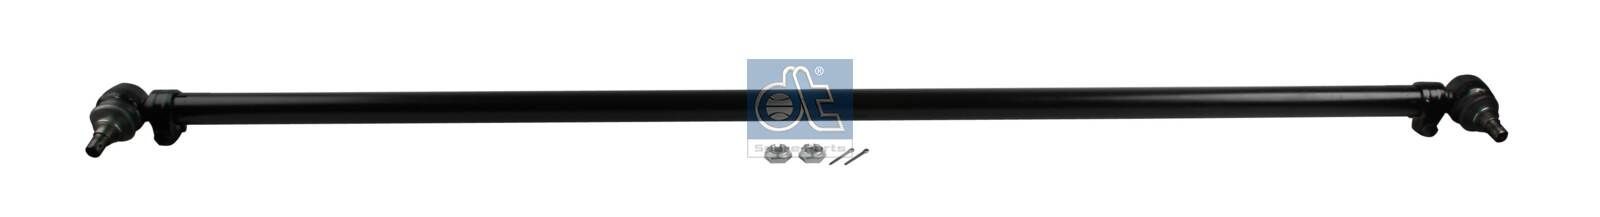 DT Spare Parts 5.22011 Rod Assembly 288 281